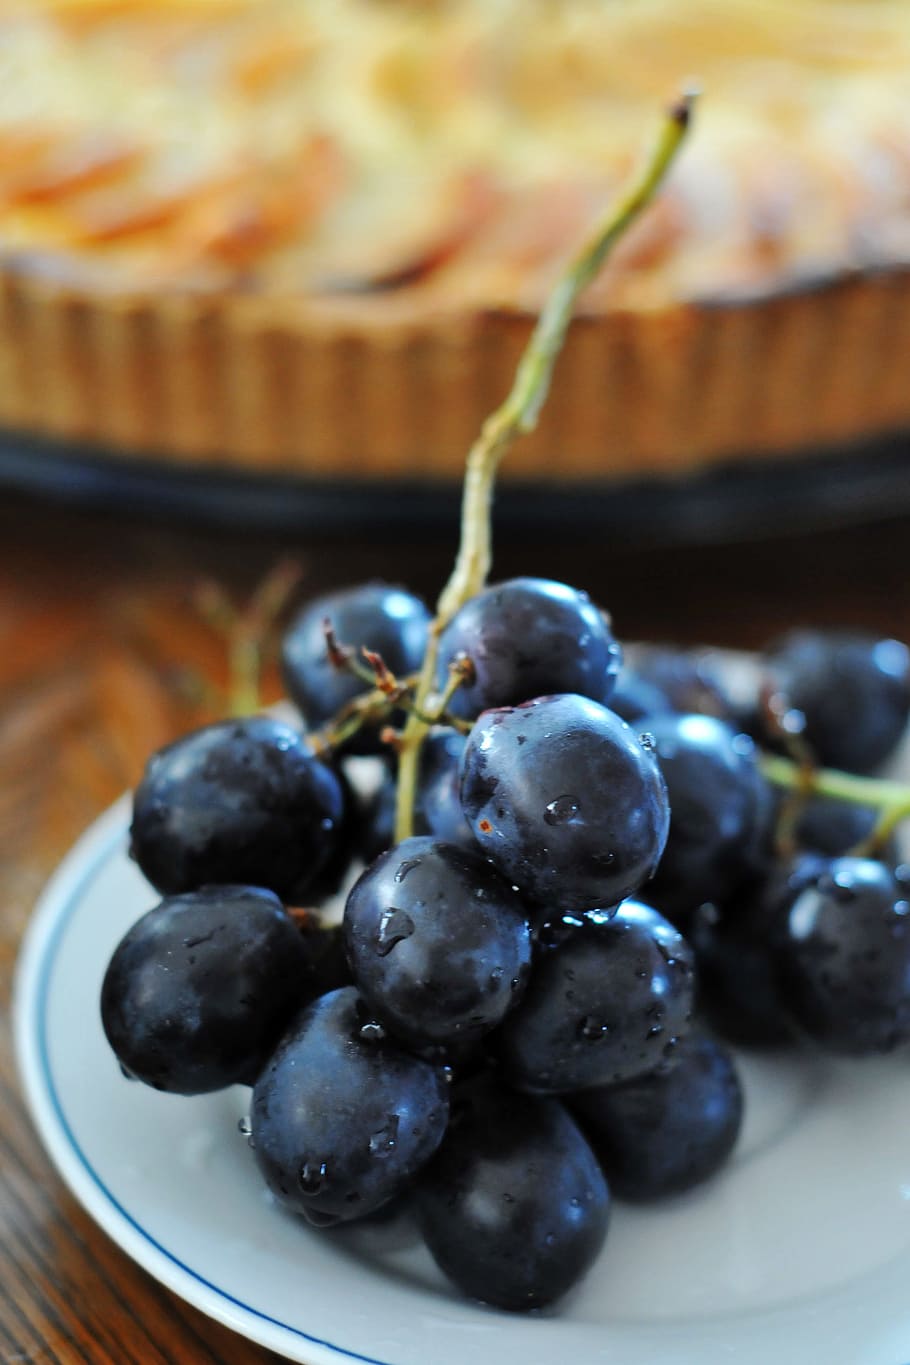 grapes, blue, fruit, food, berry, healthy, dessert, food and drink, healthy eating, freshness